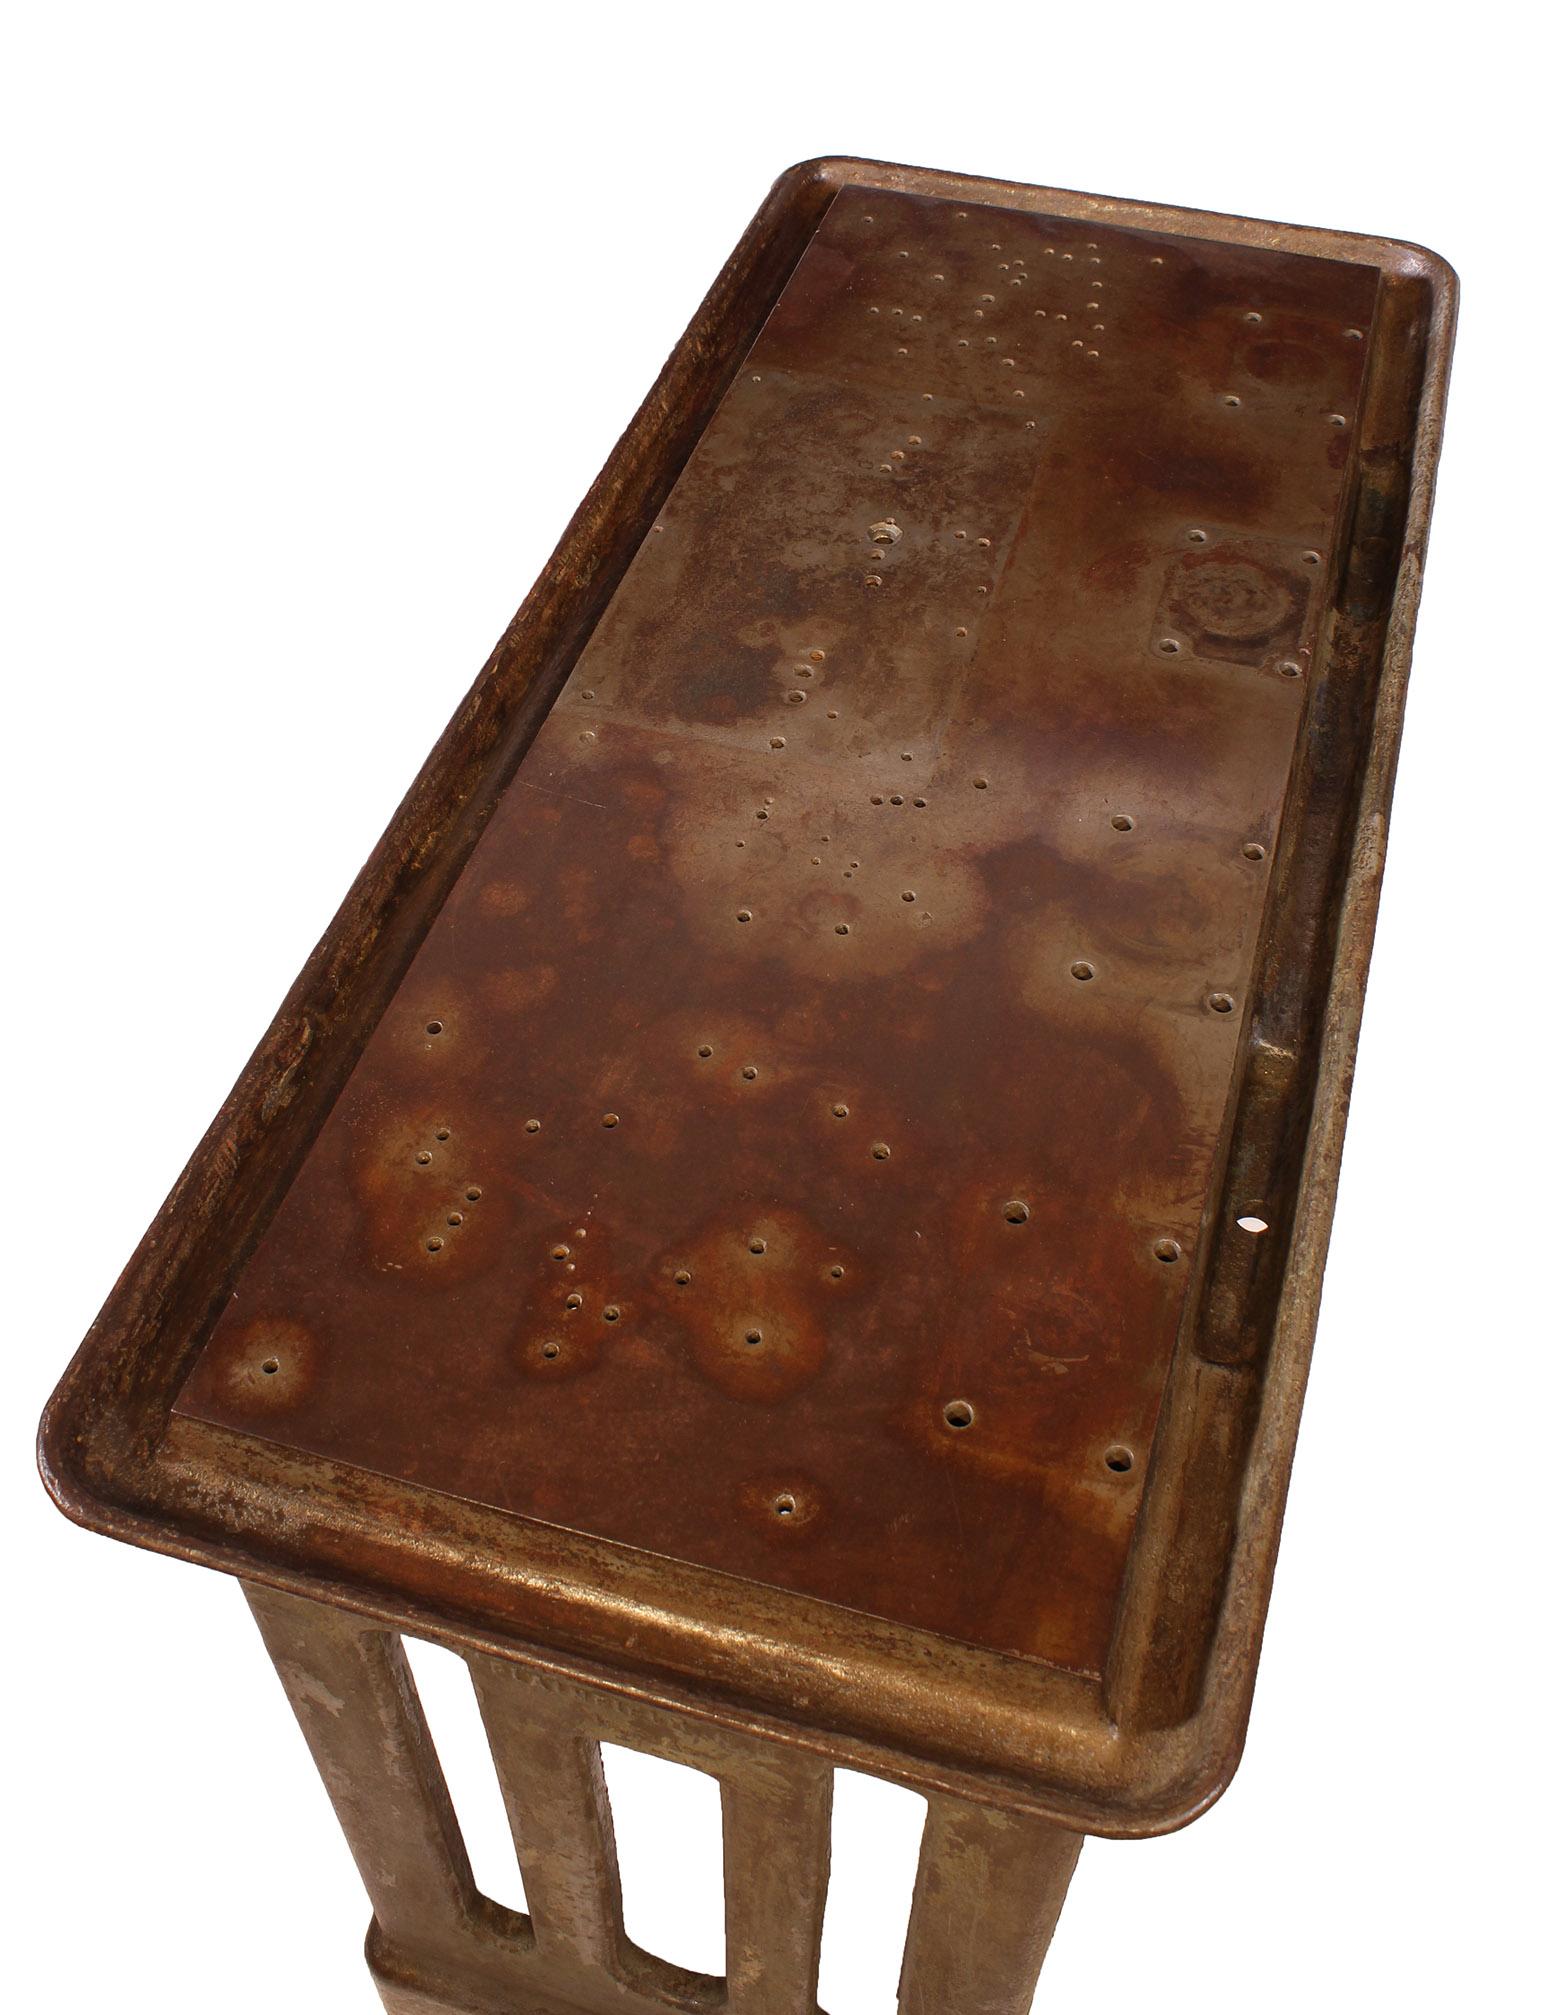 Original vintage Industrial cast iron work machine table. Beautifully worn top that features a 'moat' used for collecting machine oil. Art Deco in style, would make a great statement piece as a desk or display table. Overall dimensions measure: 49